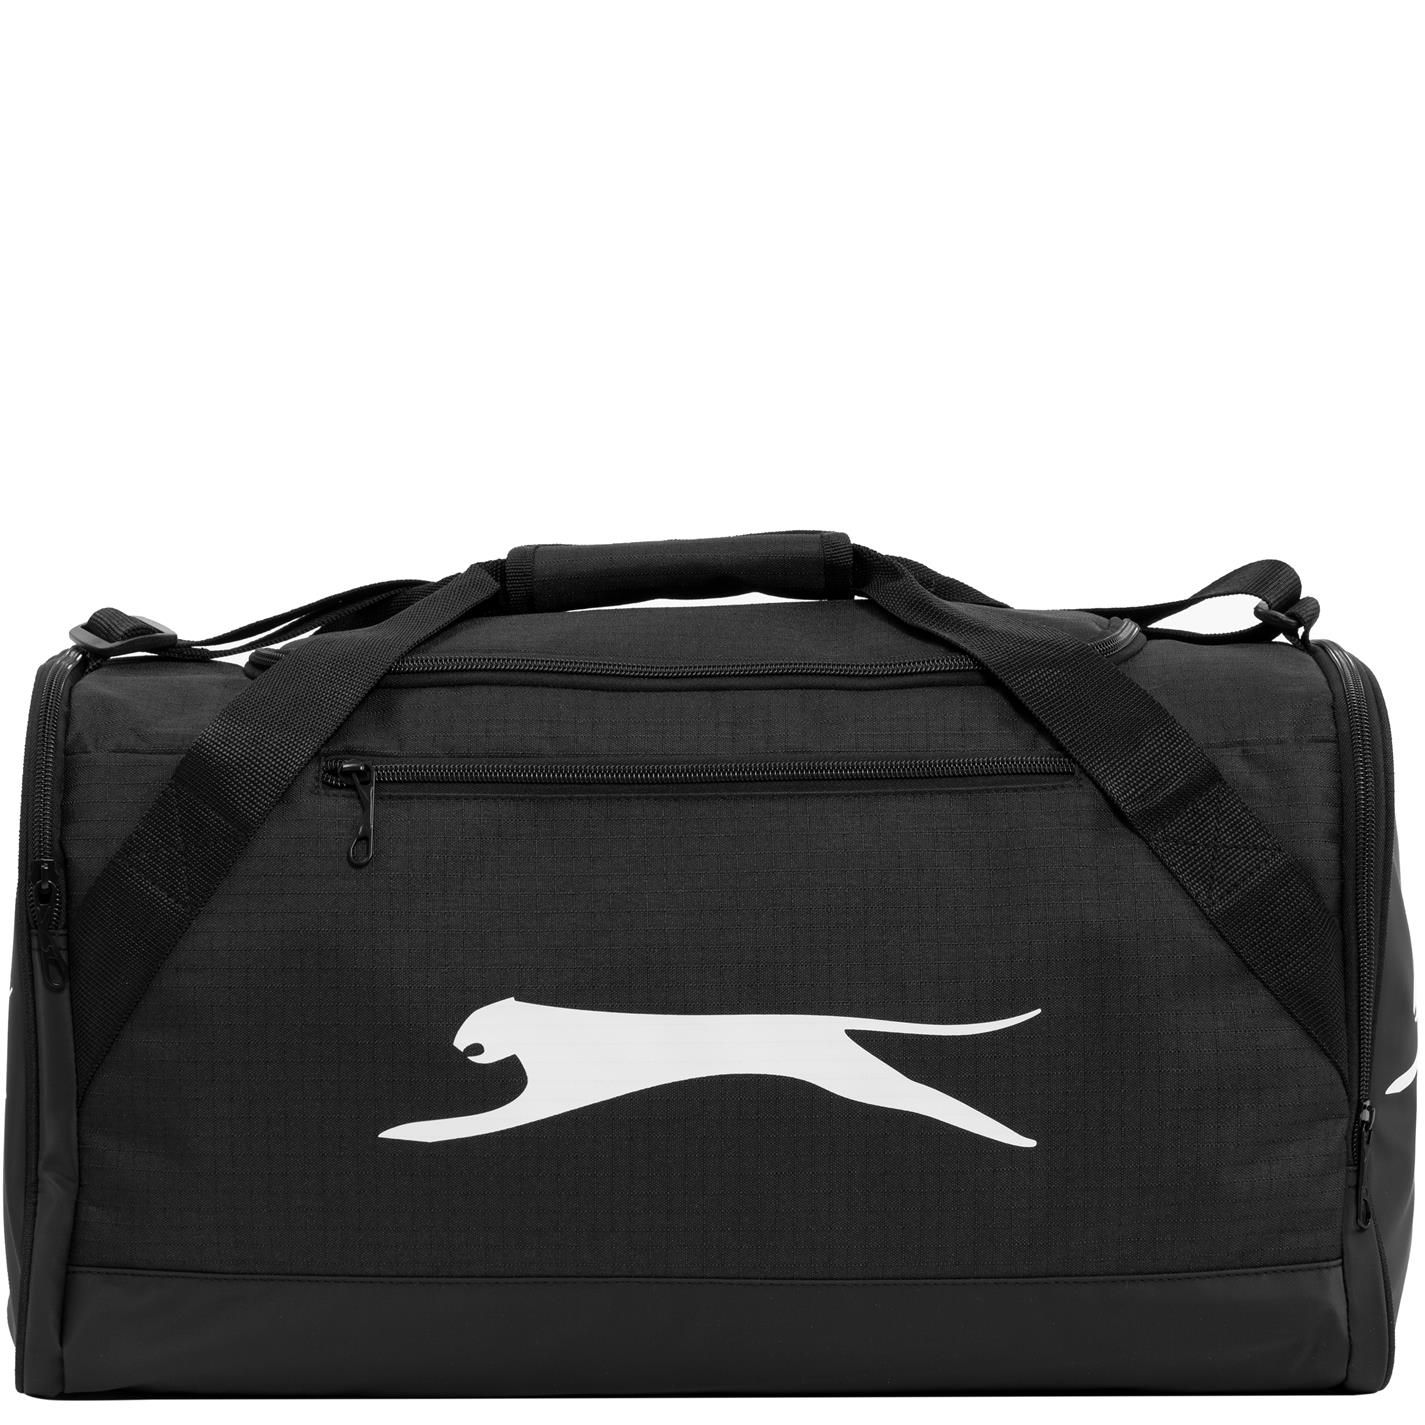 Slazenger Small Holdall - This Slazenger Small Holdall is ideal for everyday use, carrying your items to the gym or taking on a weekend away. It has a main zipped compartment to the top, a handy zip pocket on the front plus two further zip pockets to the sides for additional storage. There is an adjustable padded shoulder strap for carrying, which can be removed, a soft grip handle and smaller carry handles to the sides. The bag is finished off with Slazenger branding. This product may have slight cosmetic differences from the image shown due to assorted colours or updated seasonal collections. > Holdall > Main zipped compartment > 3 zip pockets > Removable, adjustable, padded shoulder strap > Soft carry handle > 2 side carry handles > Slazenger branding > L46cm x W22cm x D26cm > Wipe clean with a damp cloth